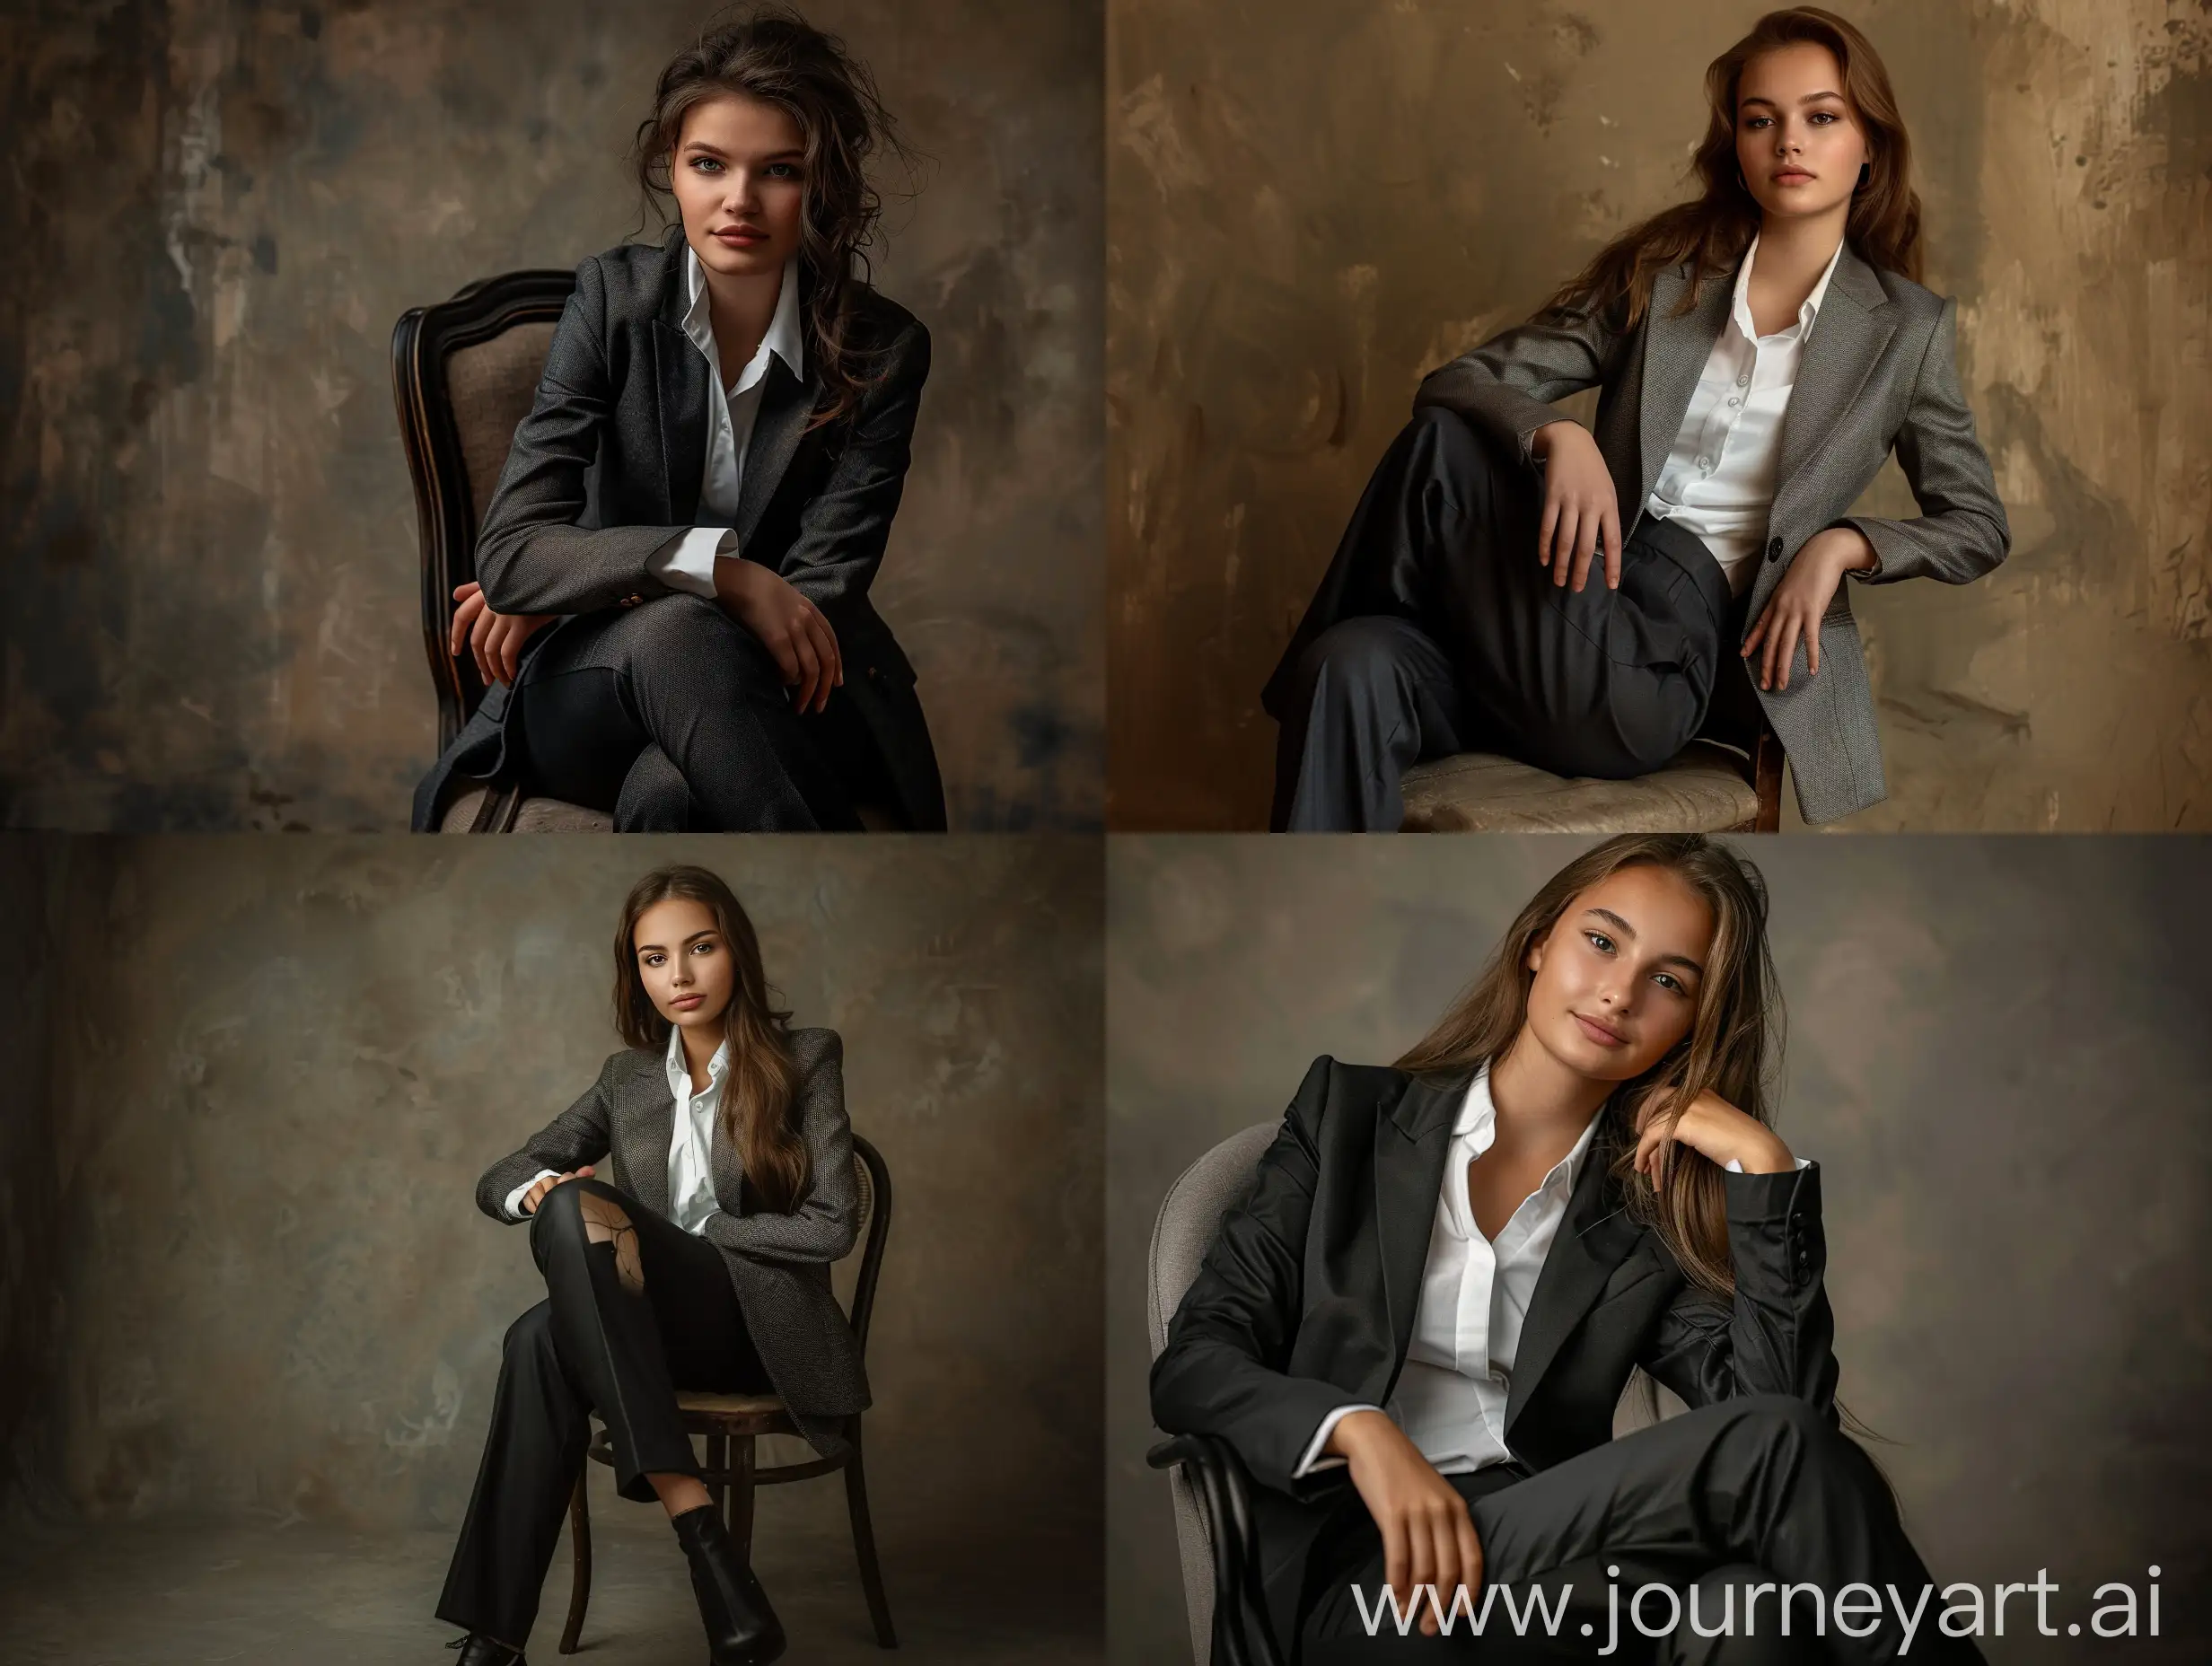 Elegant-Woman-in-Classic-Suit-Poses-with-Confidence-for-Studio-Photoshoot